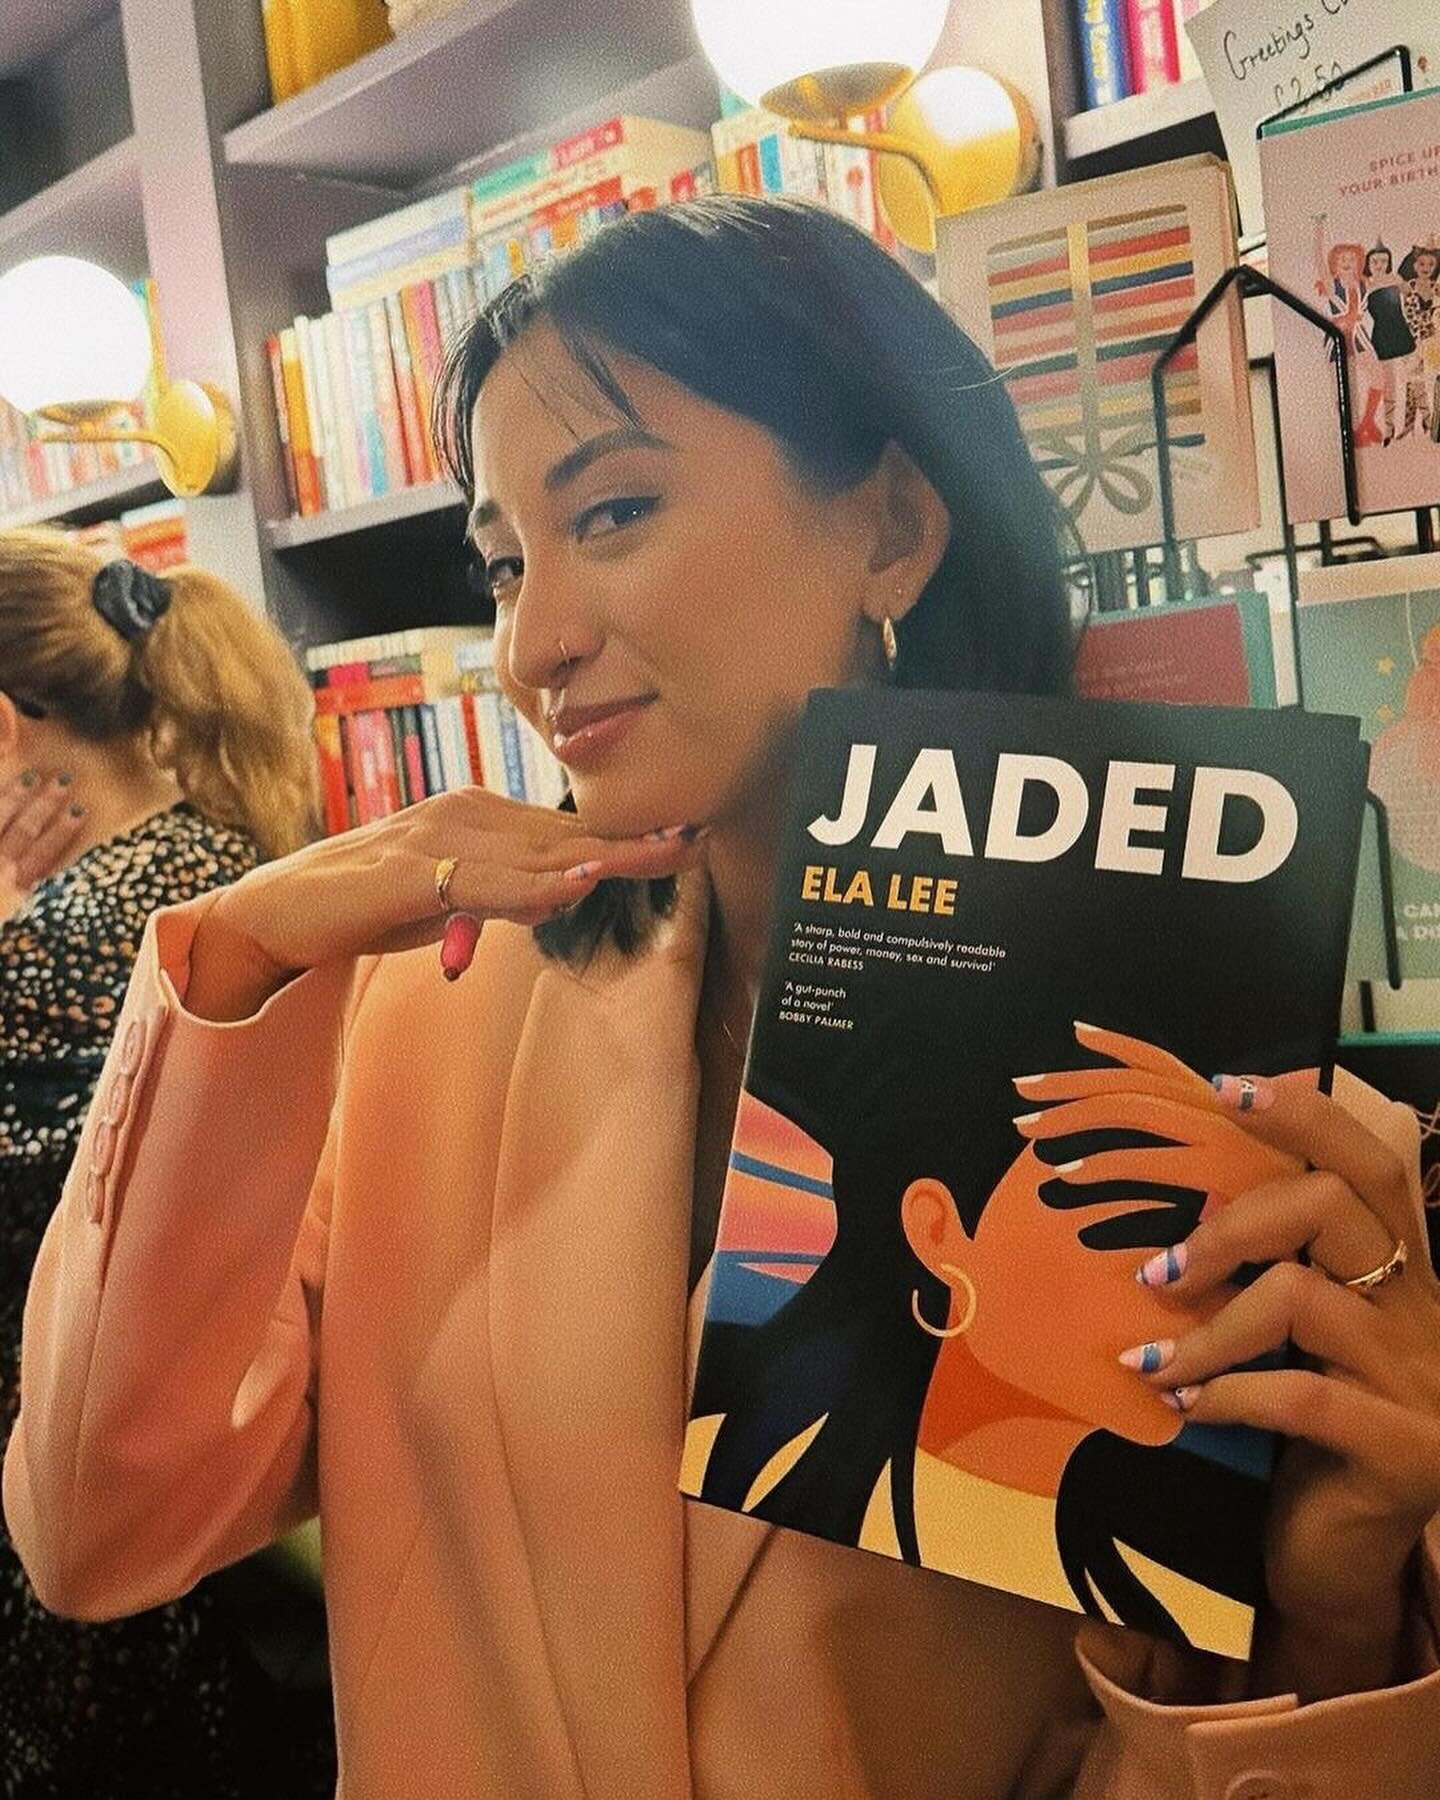 JADED, the brilliant debut novel from @ela_lee__ is now out in the UK! JADED is full of dark humour, an ode to female allyship and a heart-wrenching exploration of parental love. 

#happypublication #jaded #elalee #debutnovel #justpublished